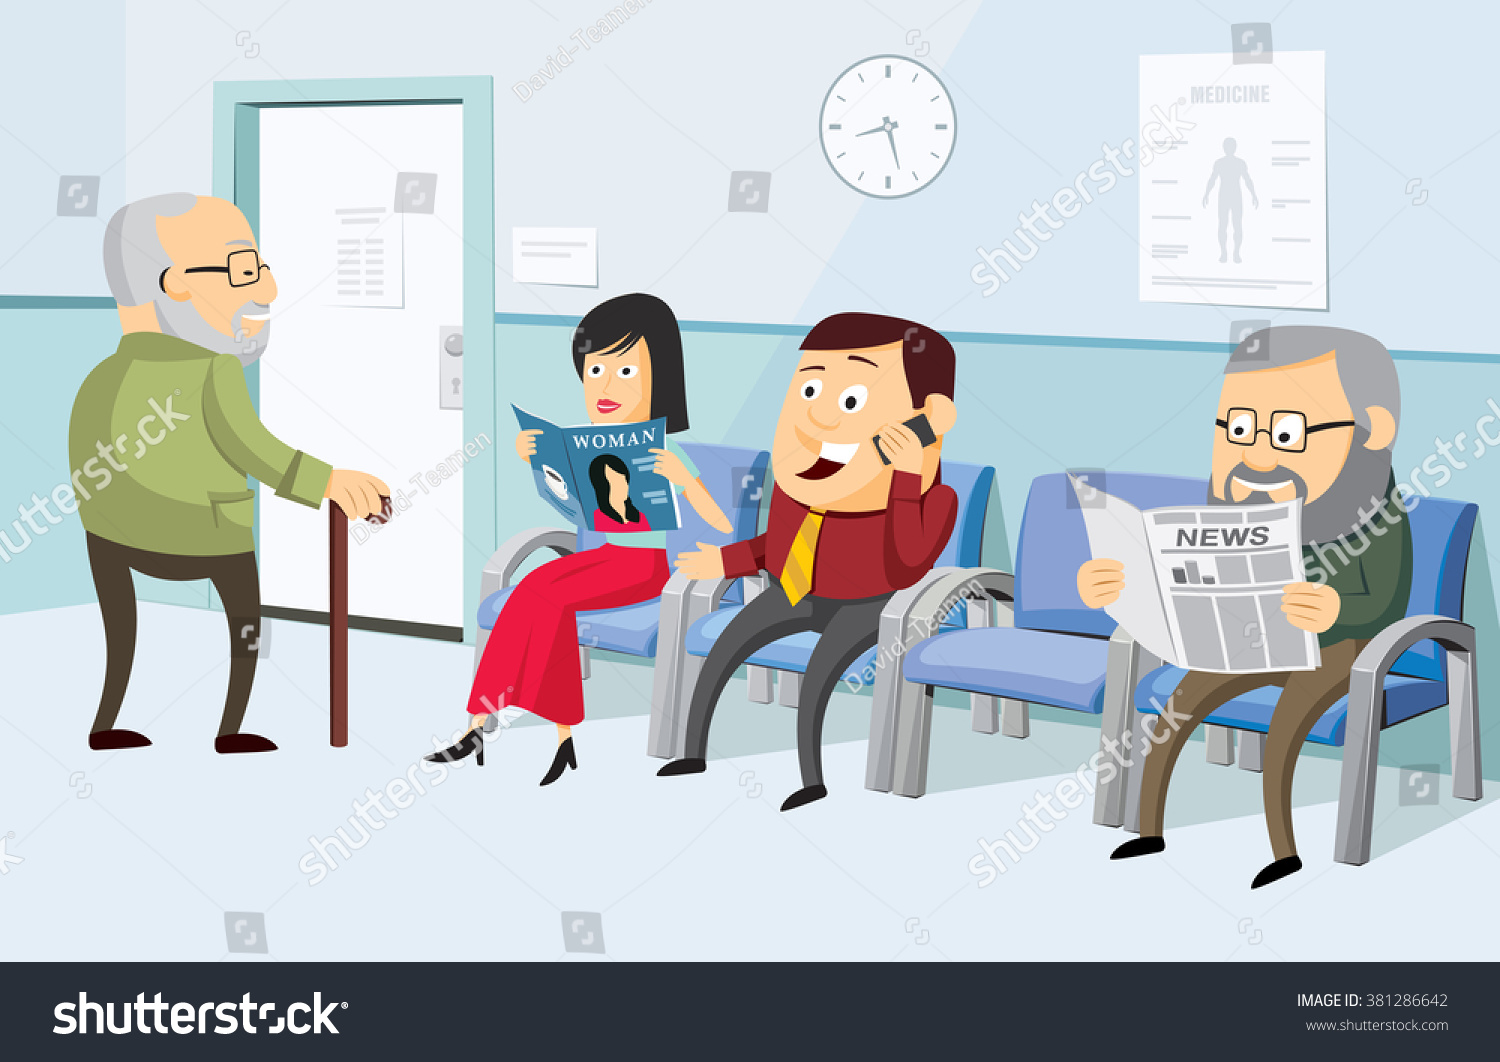 clipart waiting room - photo #17